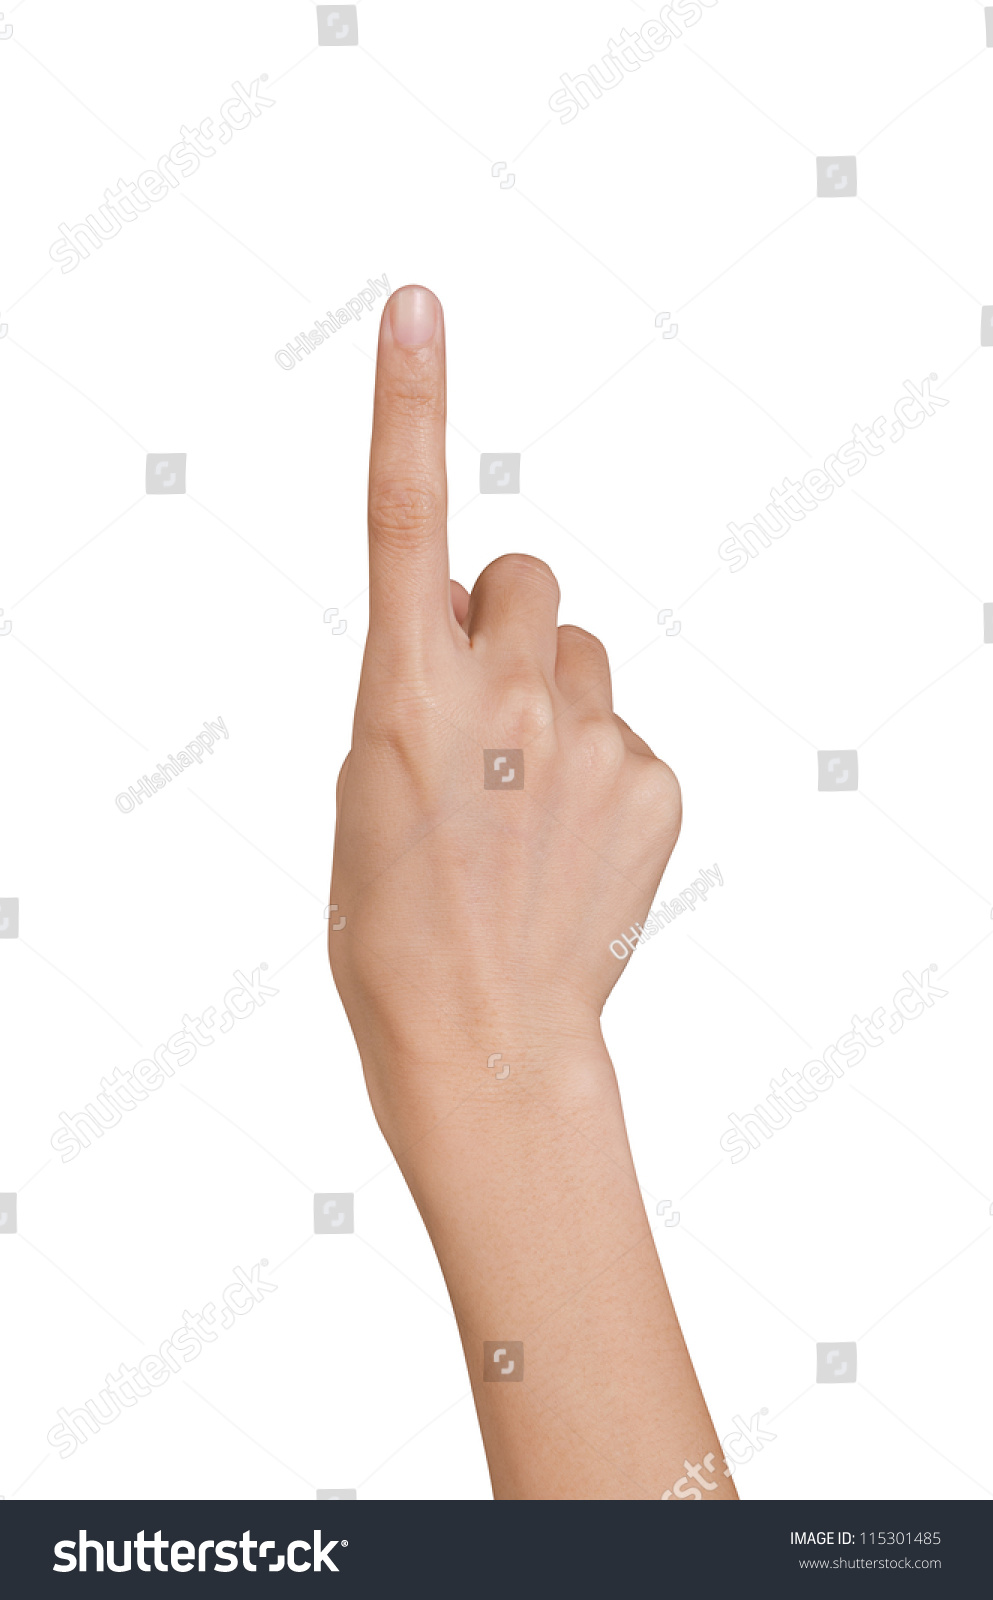 Hand pushing on a white background with clipping path #115301485